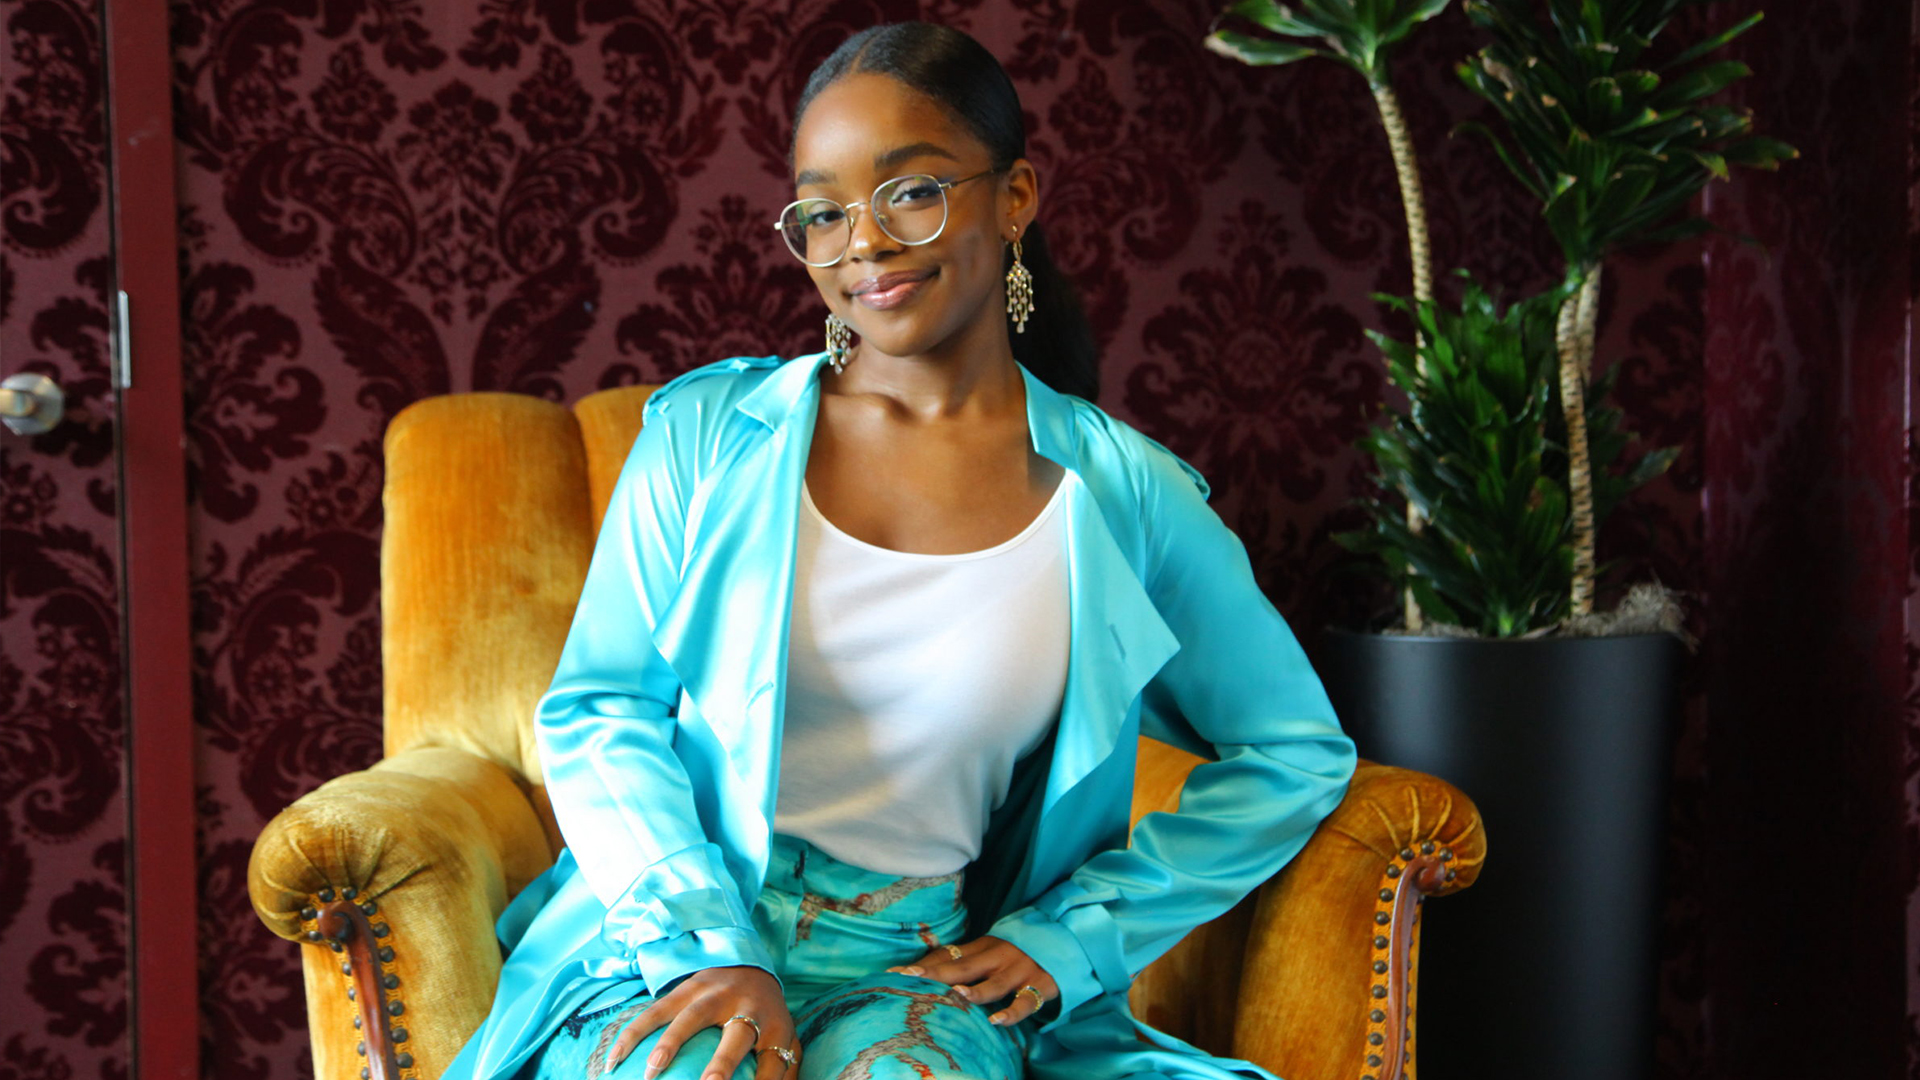 Marsai Martin Teams Up With Hollister's Creative Incubator To Provide Funding To Teen Fashion Designers